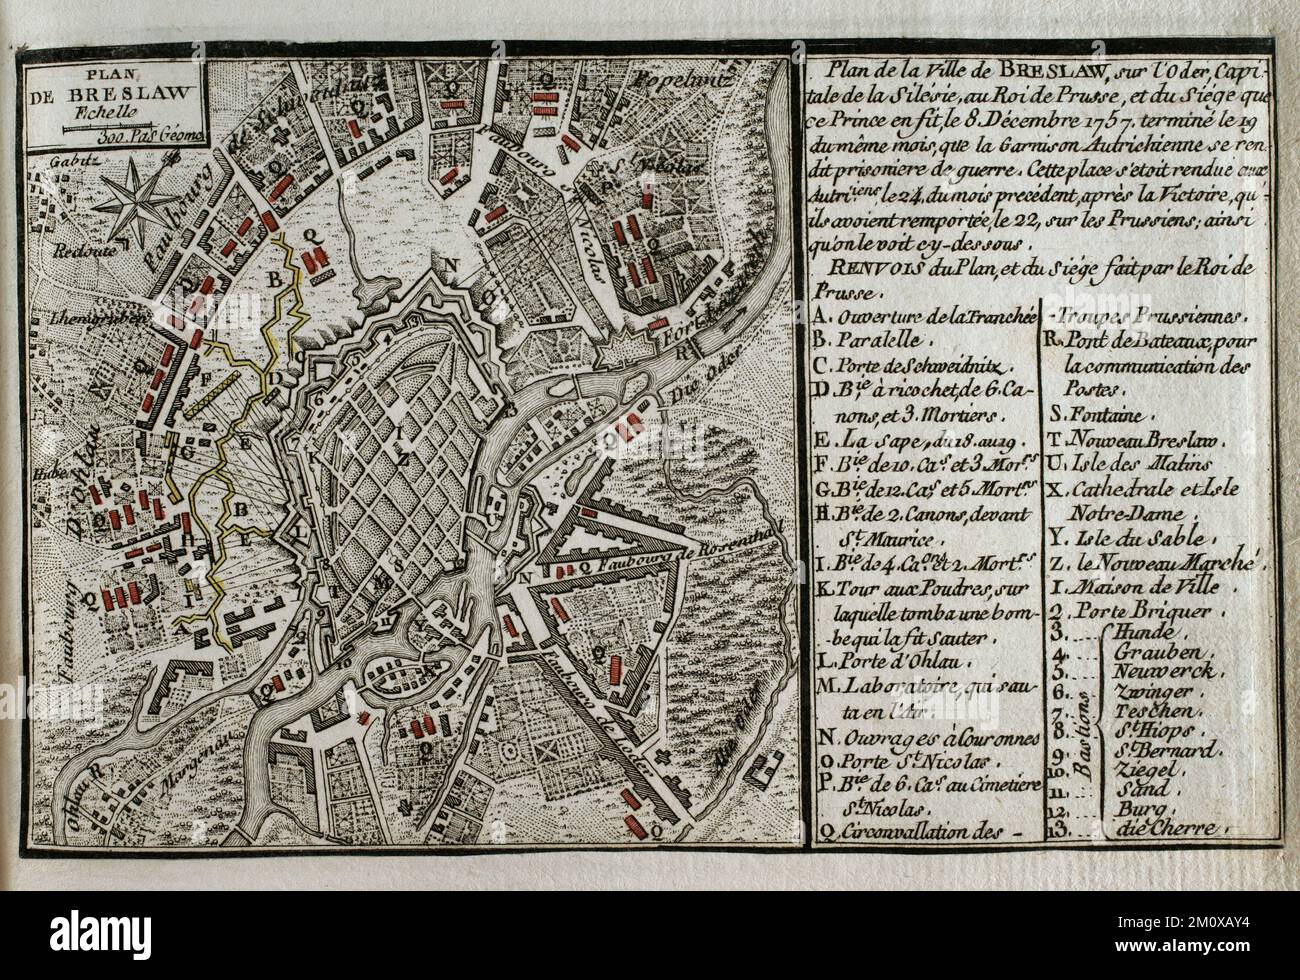 Seven Years War (1756-1763). Map of Breslau, 1757. The town was besieged by the Prussian army of Frederick the Great between 7 and 19 December 1757, which successfully engaged a combined Austrian and French force under the command of Soloman Sprecher von Bernegg. On 20 December the Austrian garrison at Breslau surrendered as prisoners of war. On 21 December the Austrians left Breslau through the Schweidnitz Gate, laying down their arms before Frederick II of Prussia. Map of Breslau and the siege to which it was subjected. Published in 1765 by the cartographer Jean de Beaurain (1696-1771) as an Stock Photo